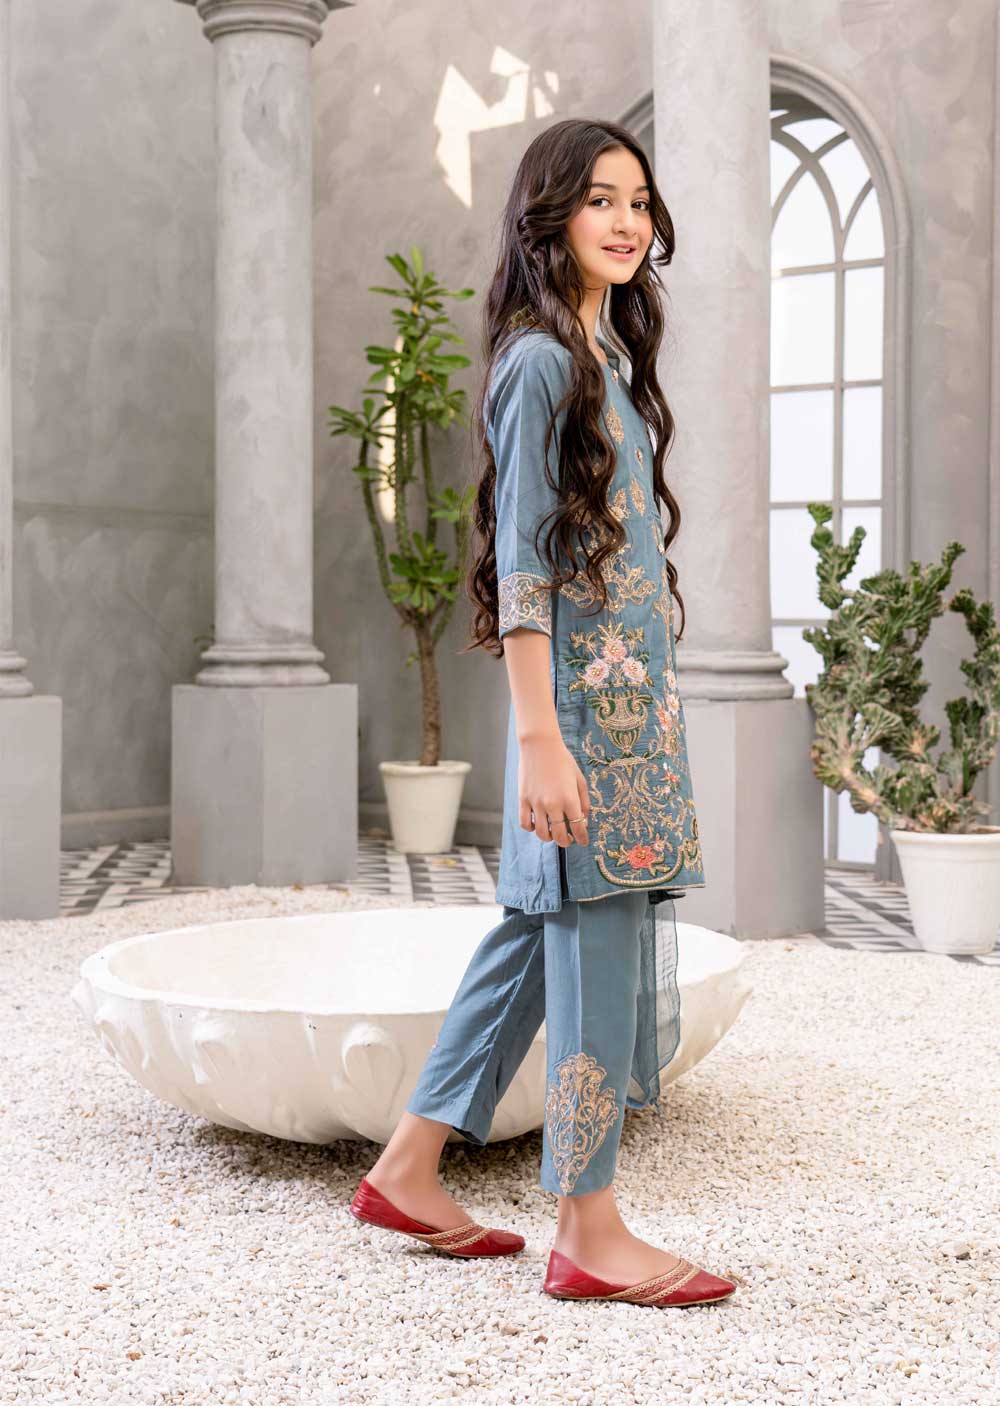 HK08 Readymade Grey/Green Embroidered Mother & Daughter Linen Suit - Memsaab Online